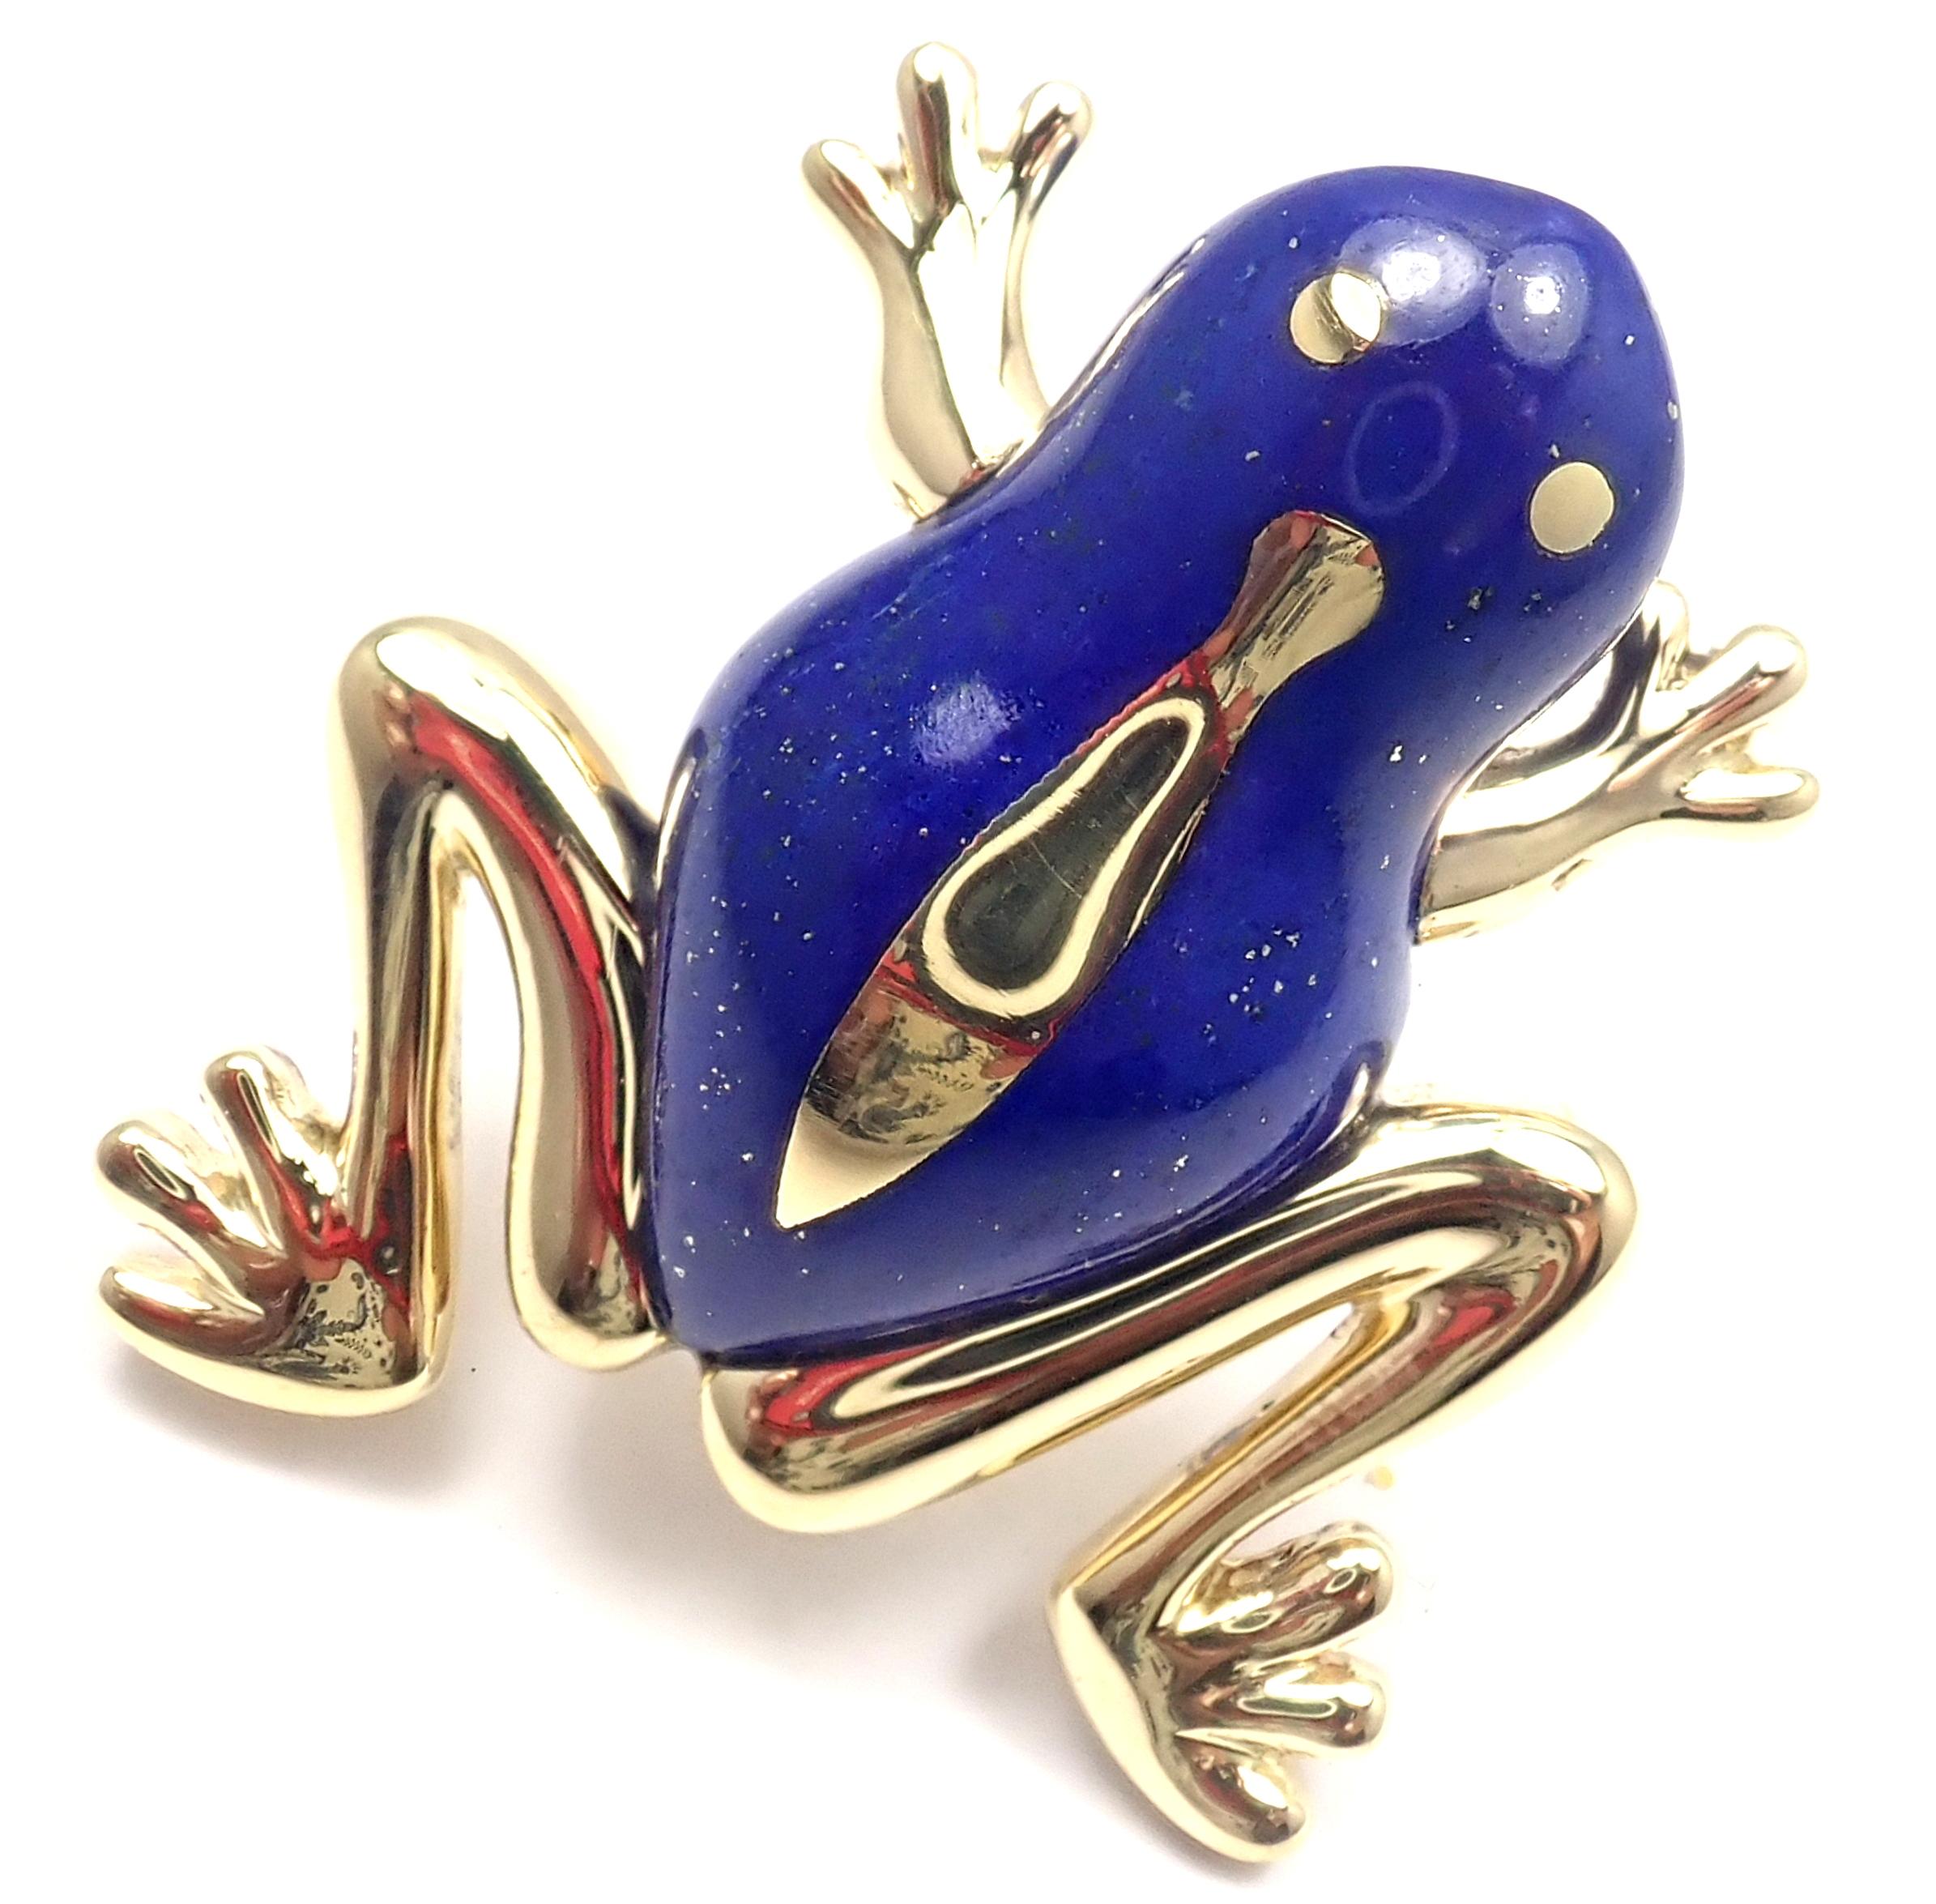 18k Yellow Gold Lapis Lazuli Frog Pin Brooch by Tiffany & Co. 
With 1 Large Lapis Lasuli
Details: 
Measurements: 1 3/4